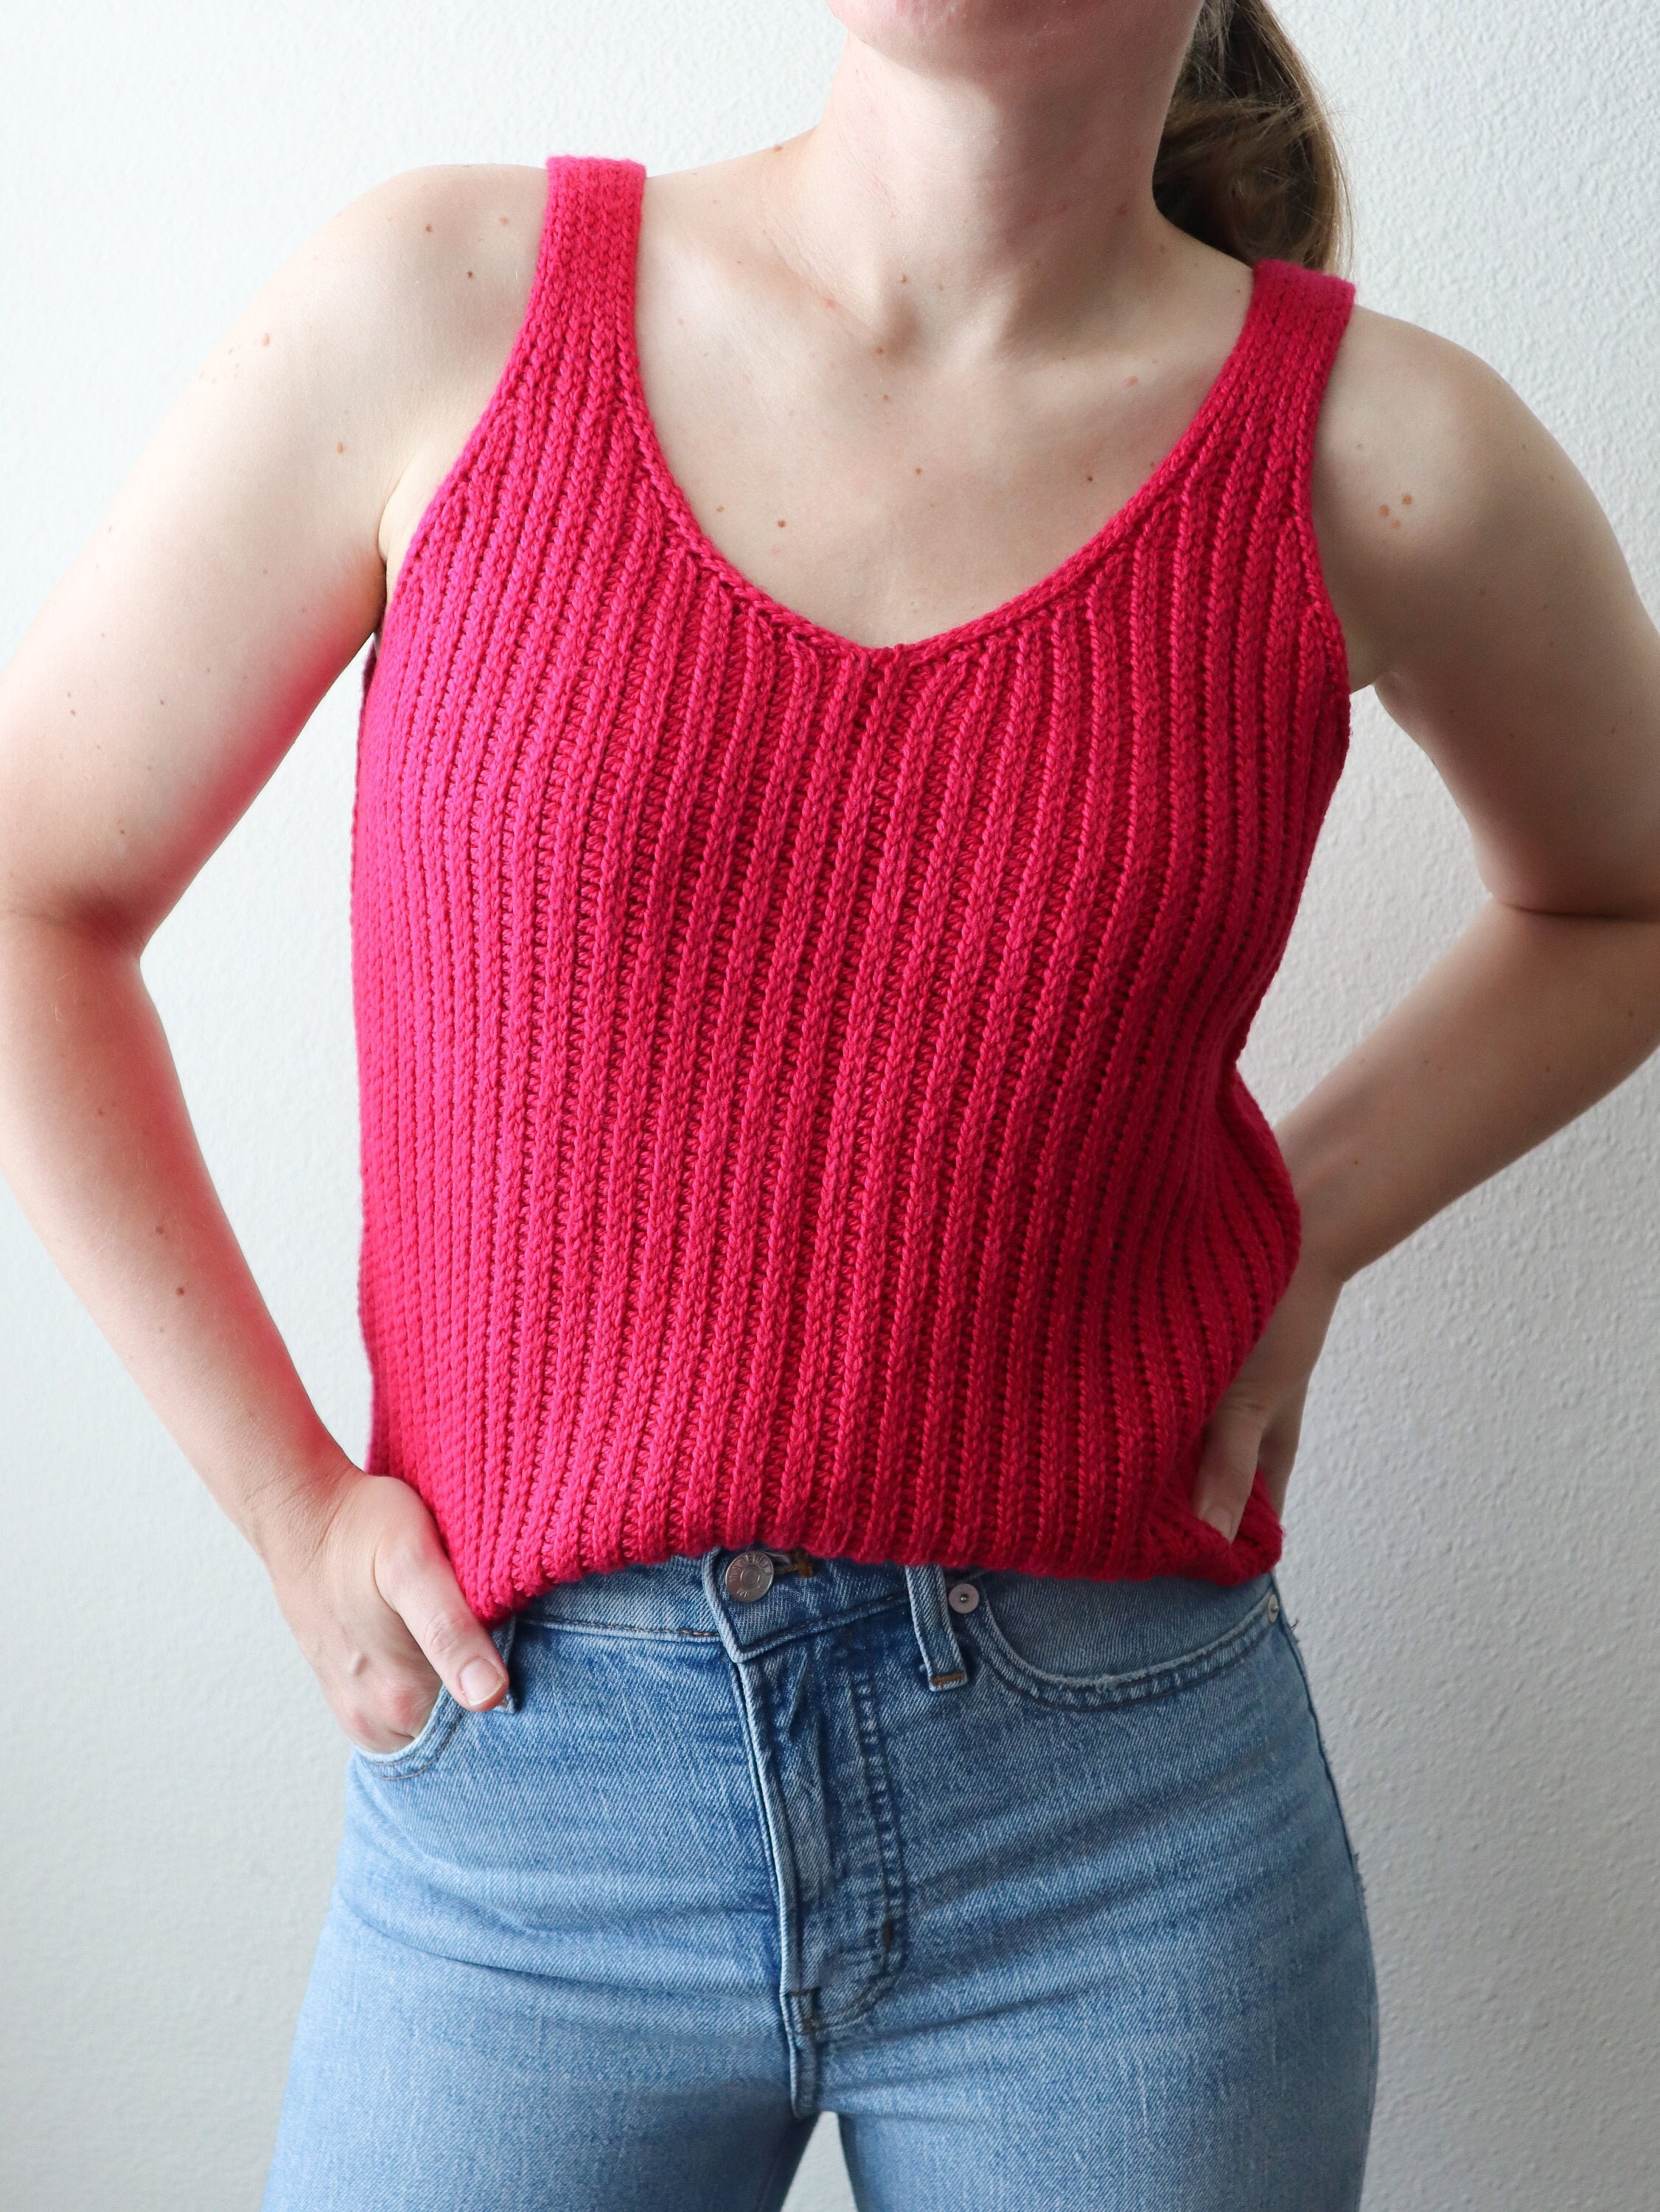 Ribbed Tank Top Knitting Pattern // Multnomah // Sleeveless Halter Teens Top  / Classic Summer Knit Top With Straps / Fingering, DK, Worsted 